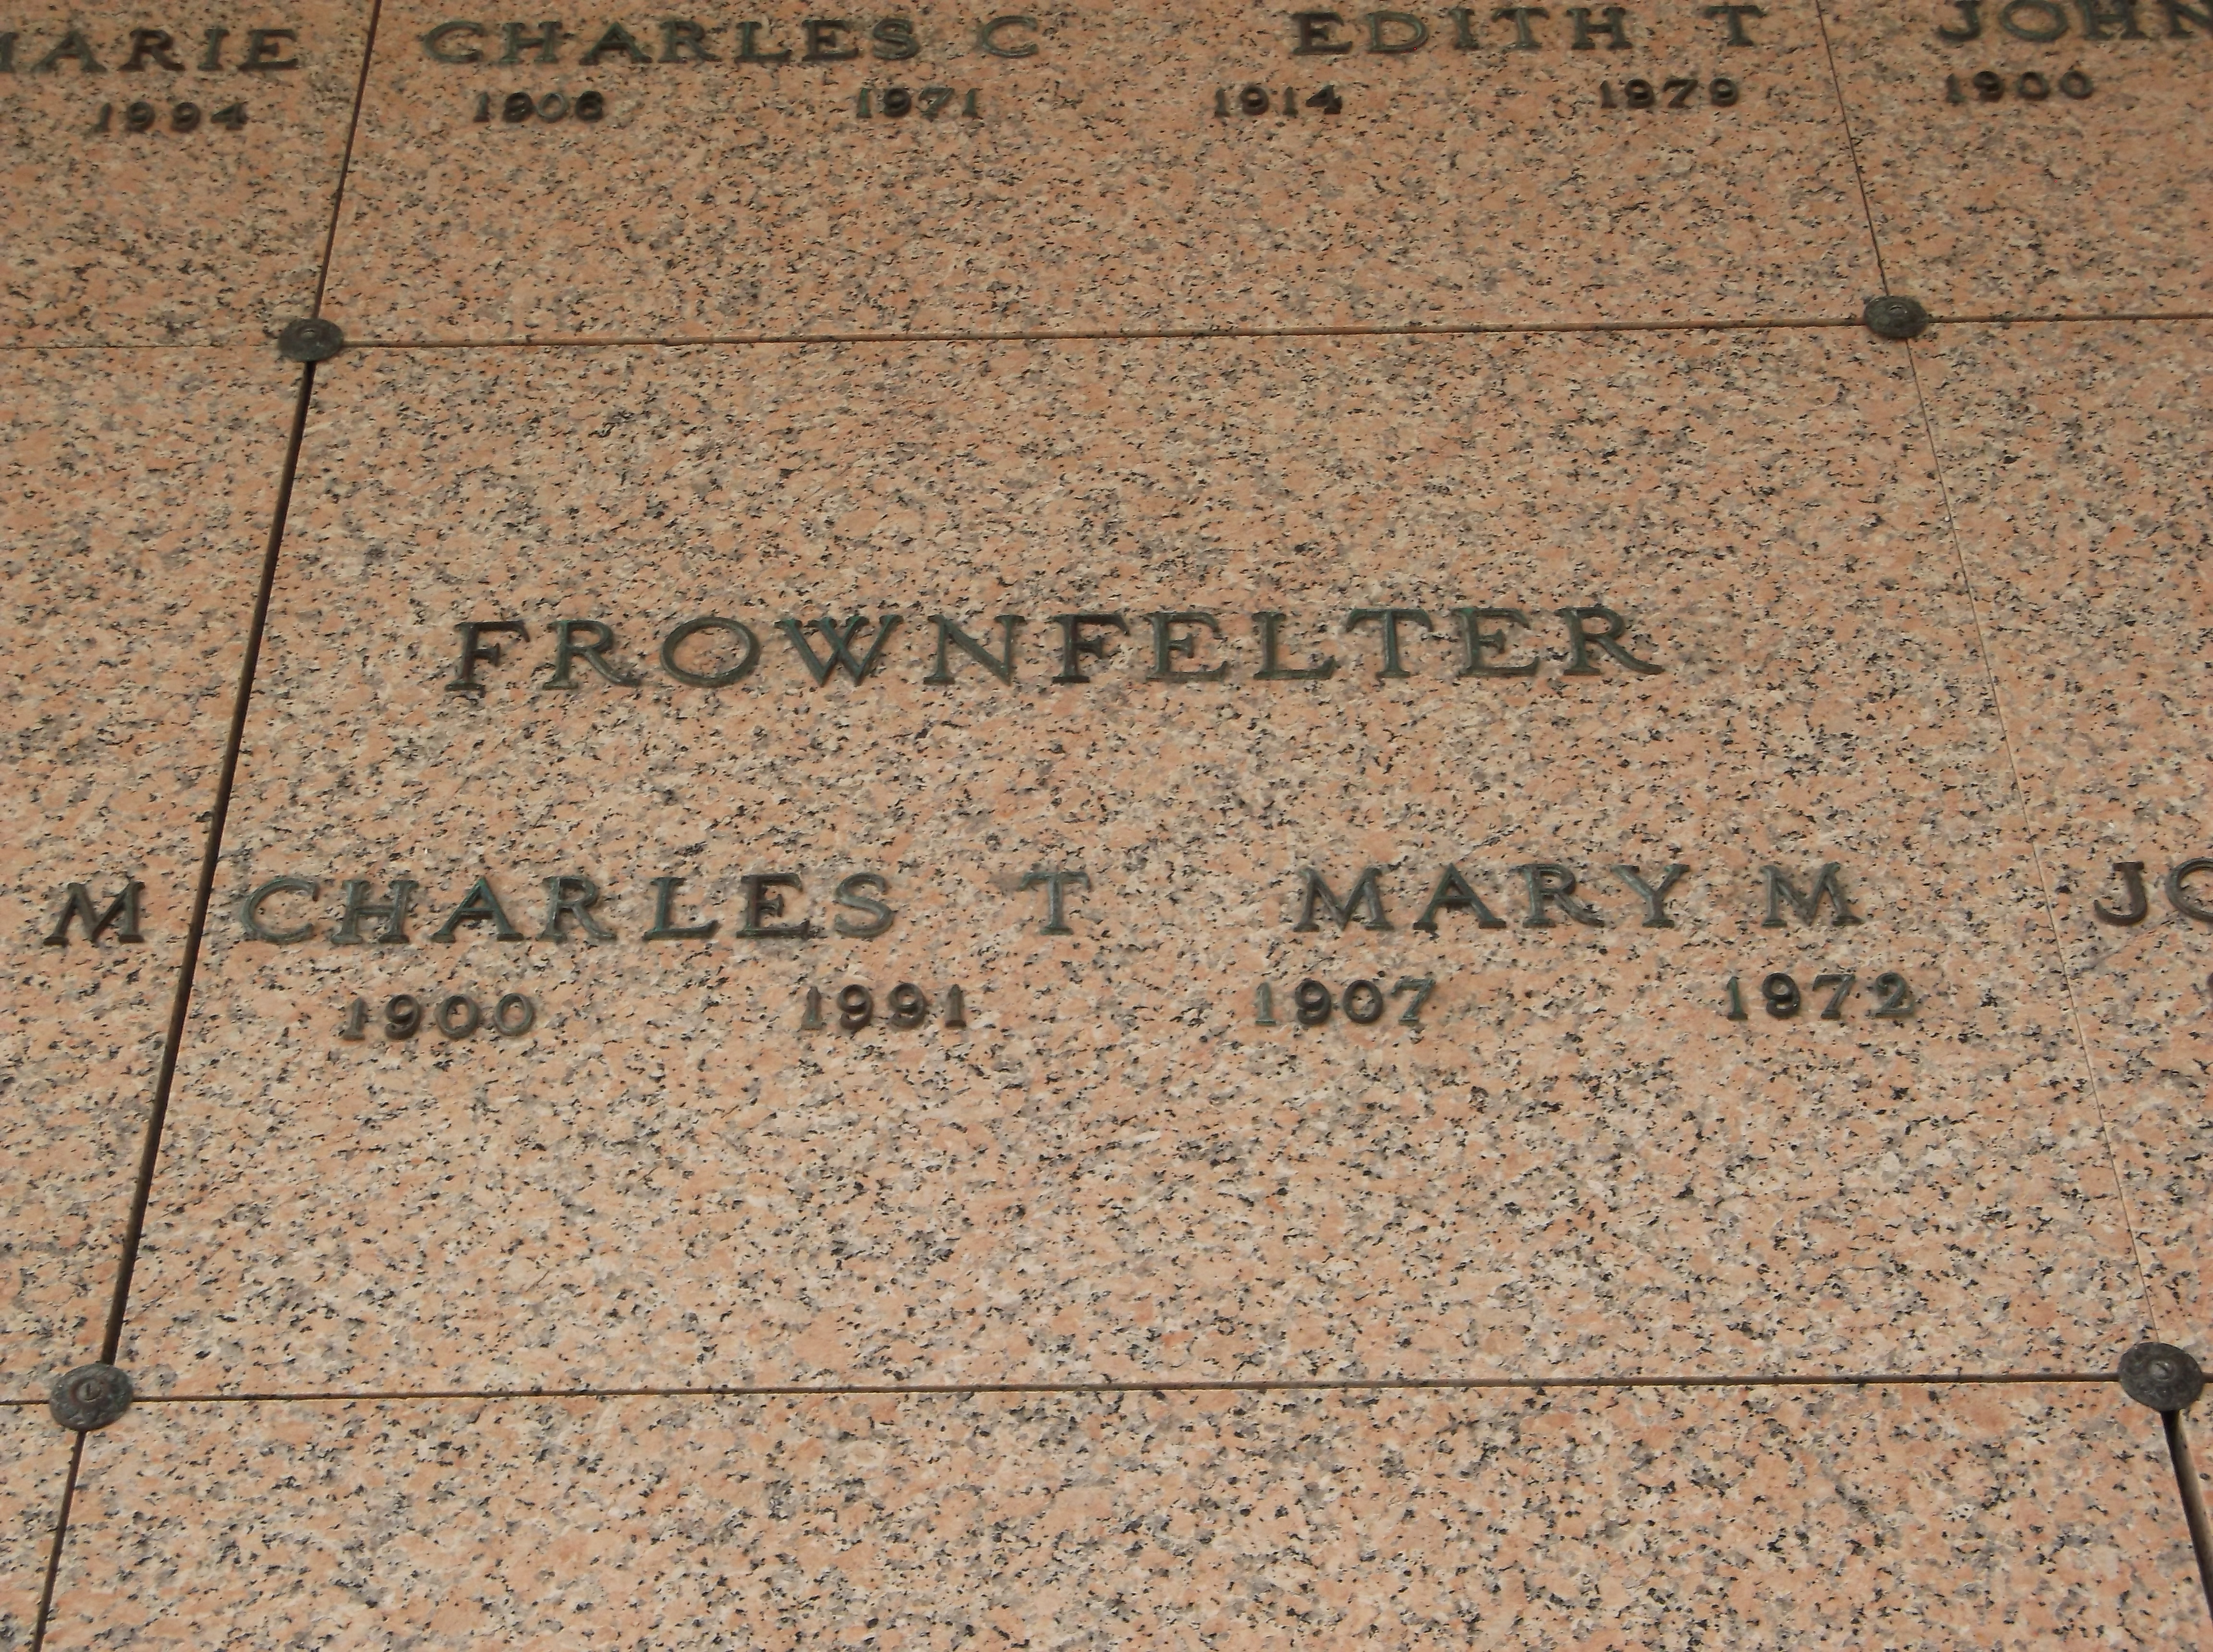 Charles T Frownfelter